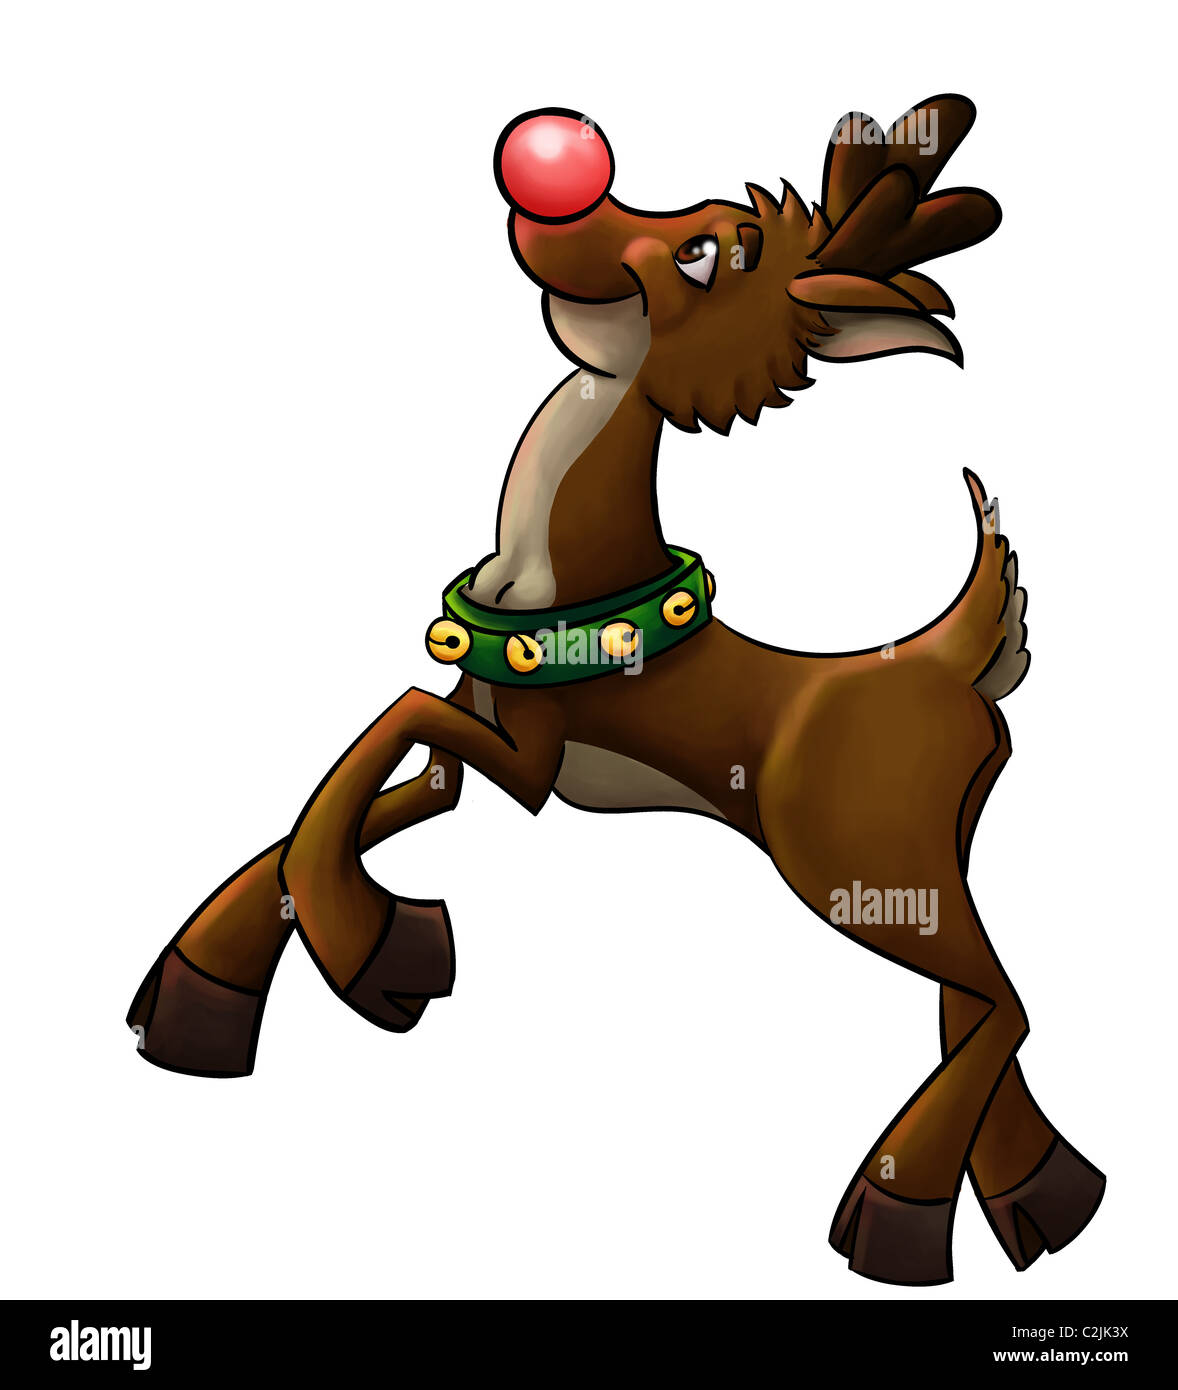 rudolph the red nose reindeer starting to fly Stock Photo